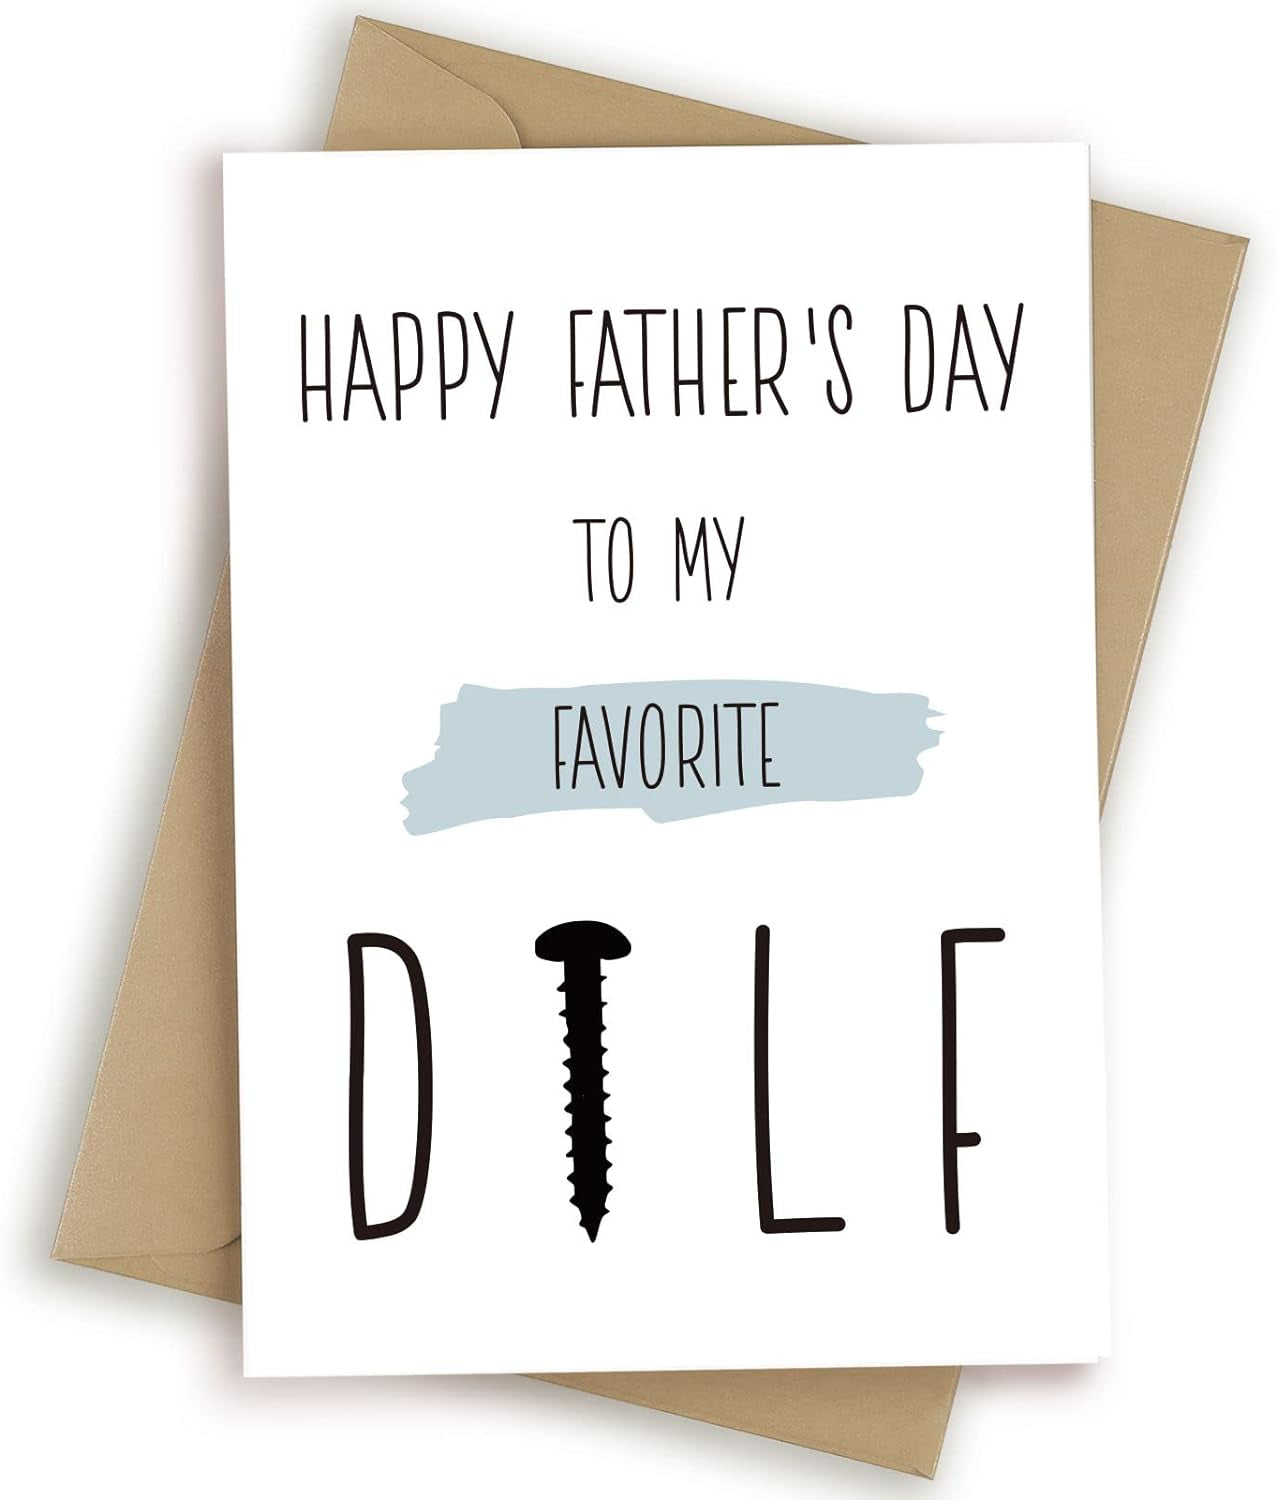 Funny Fathers Day Card from Wife, Humorous Dad Birthday Gifts, Romantic Greeting Card for Husband New Father, You Are My Favorite Dilf with Kraft Envelope